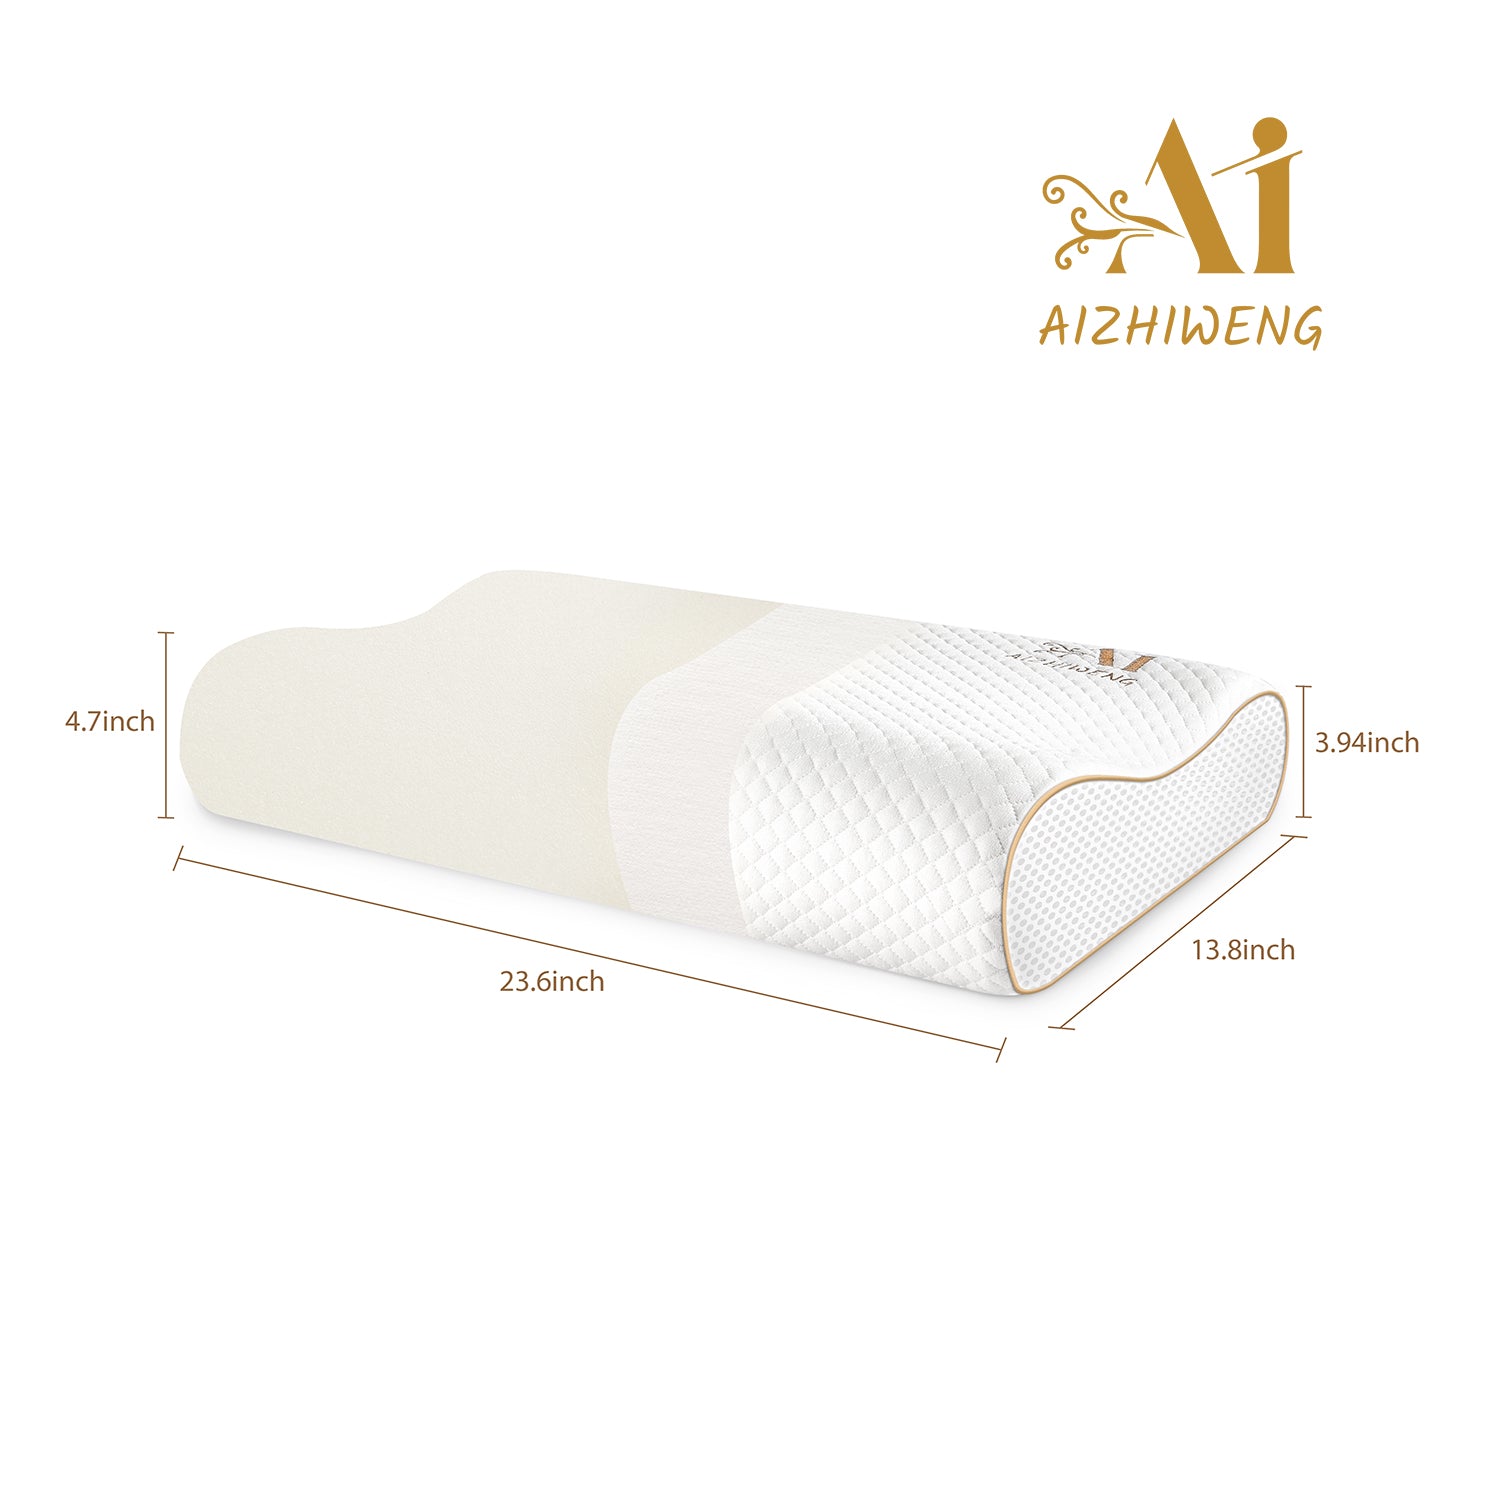 AIZHIWENG Memory Foam Contour Pillow, Cervical Support Pillow for Sleeping, Queen Size White